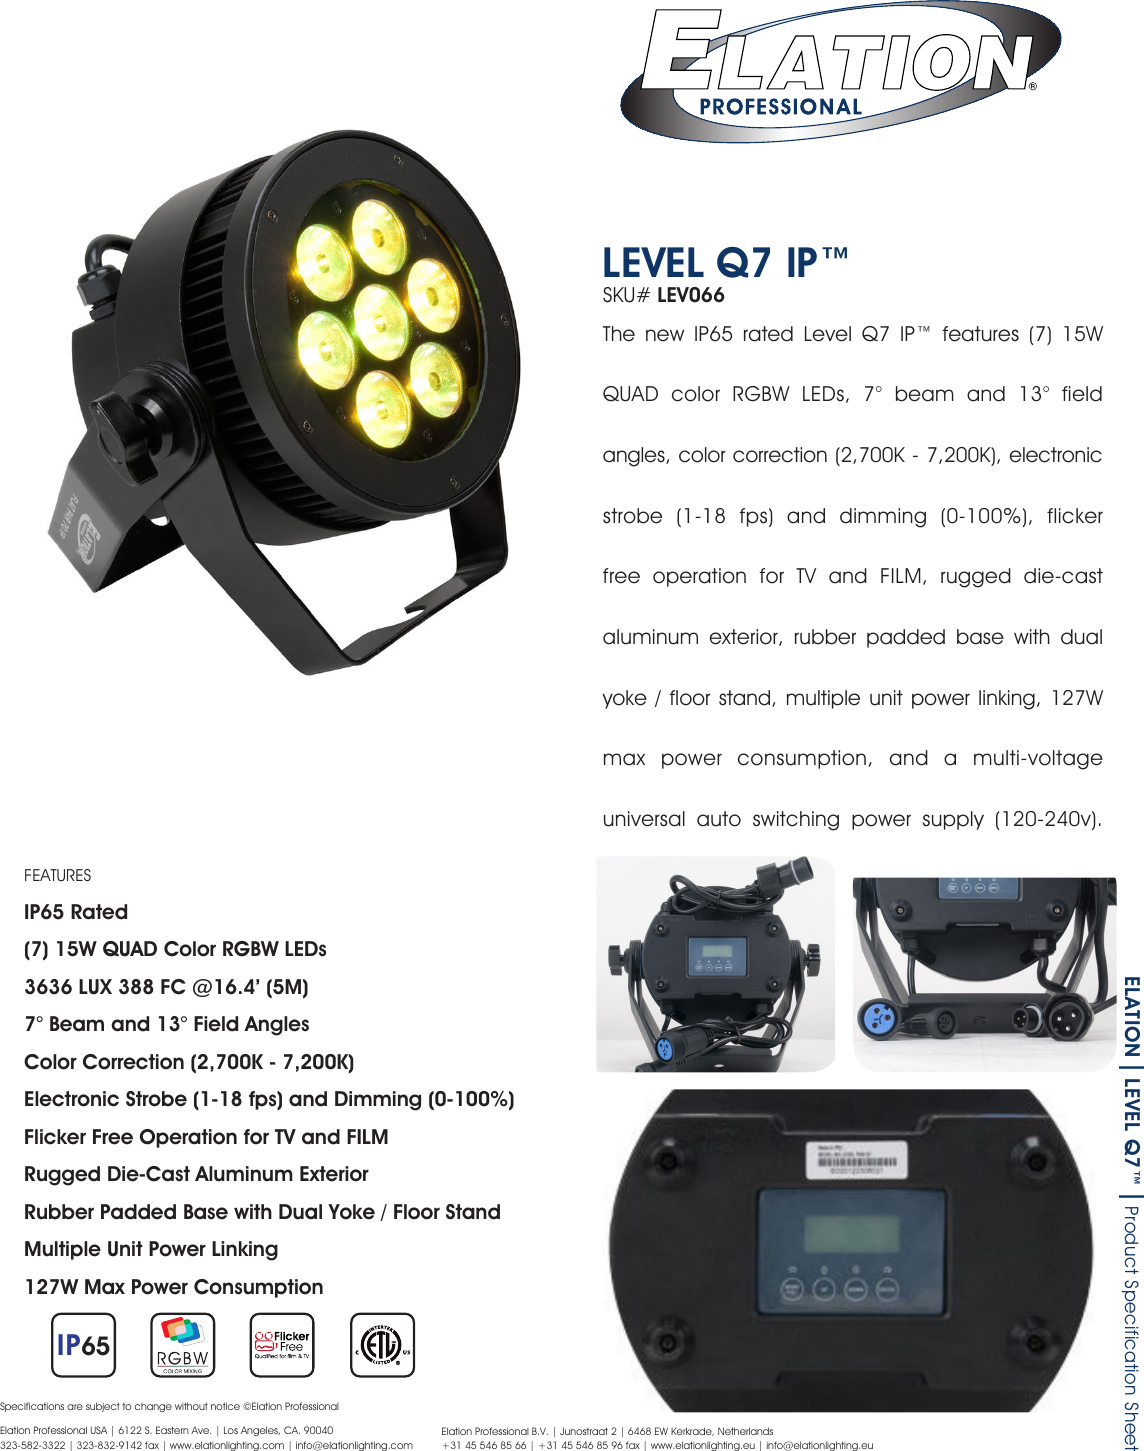 Page 1 of 2 - Elation Level Q7 Ip Specification Sheet